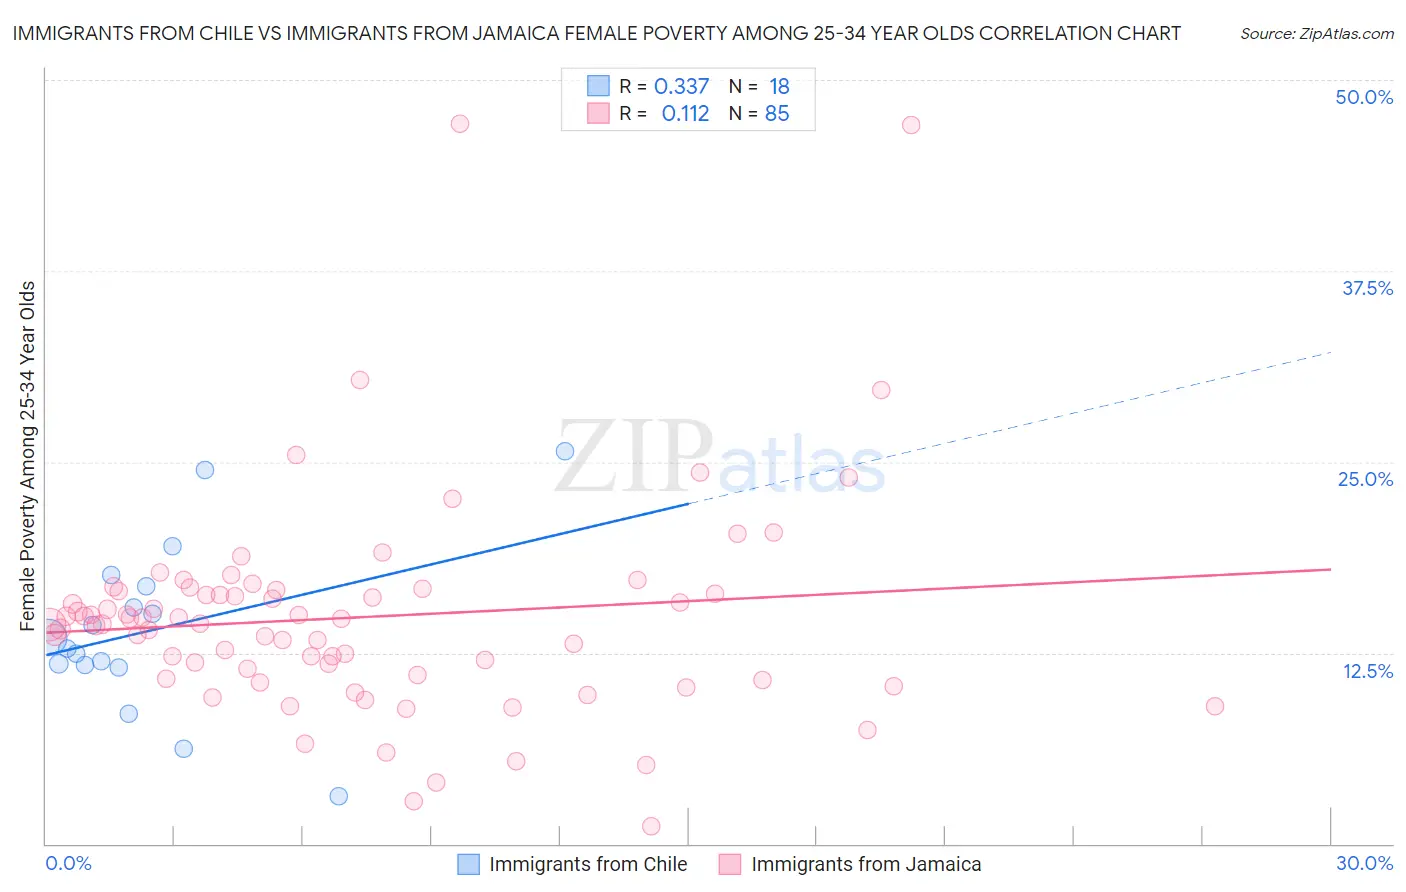 Immigrants from Chile vs Immigrants from Jamaica Female Poverty Among 25-34 Year Olds